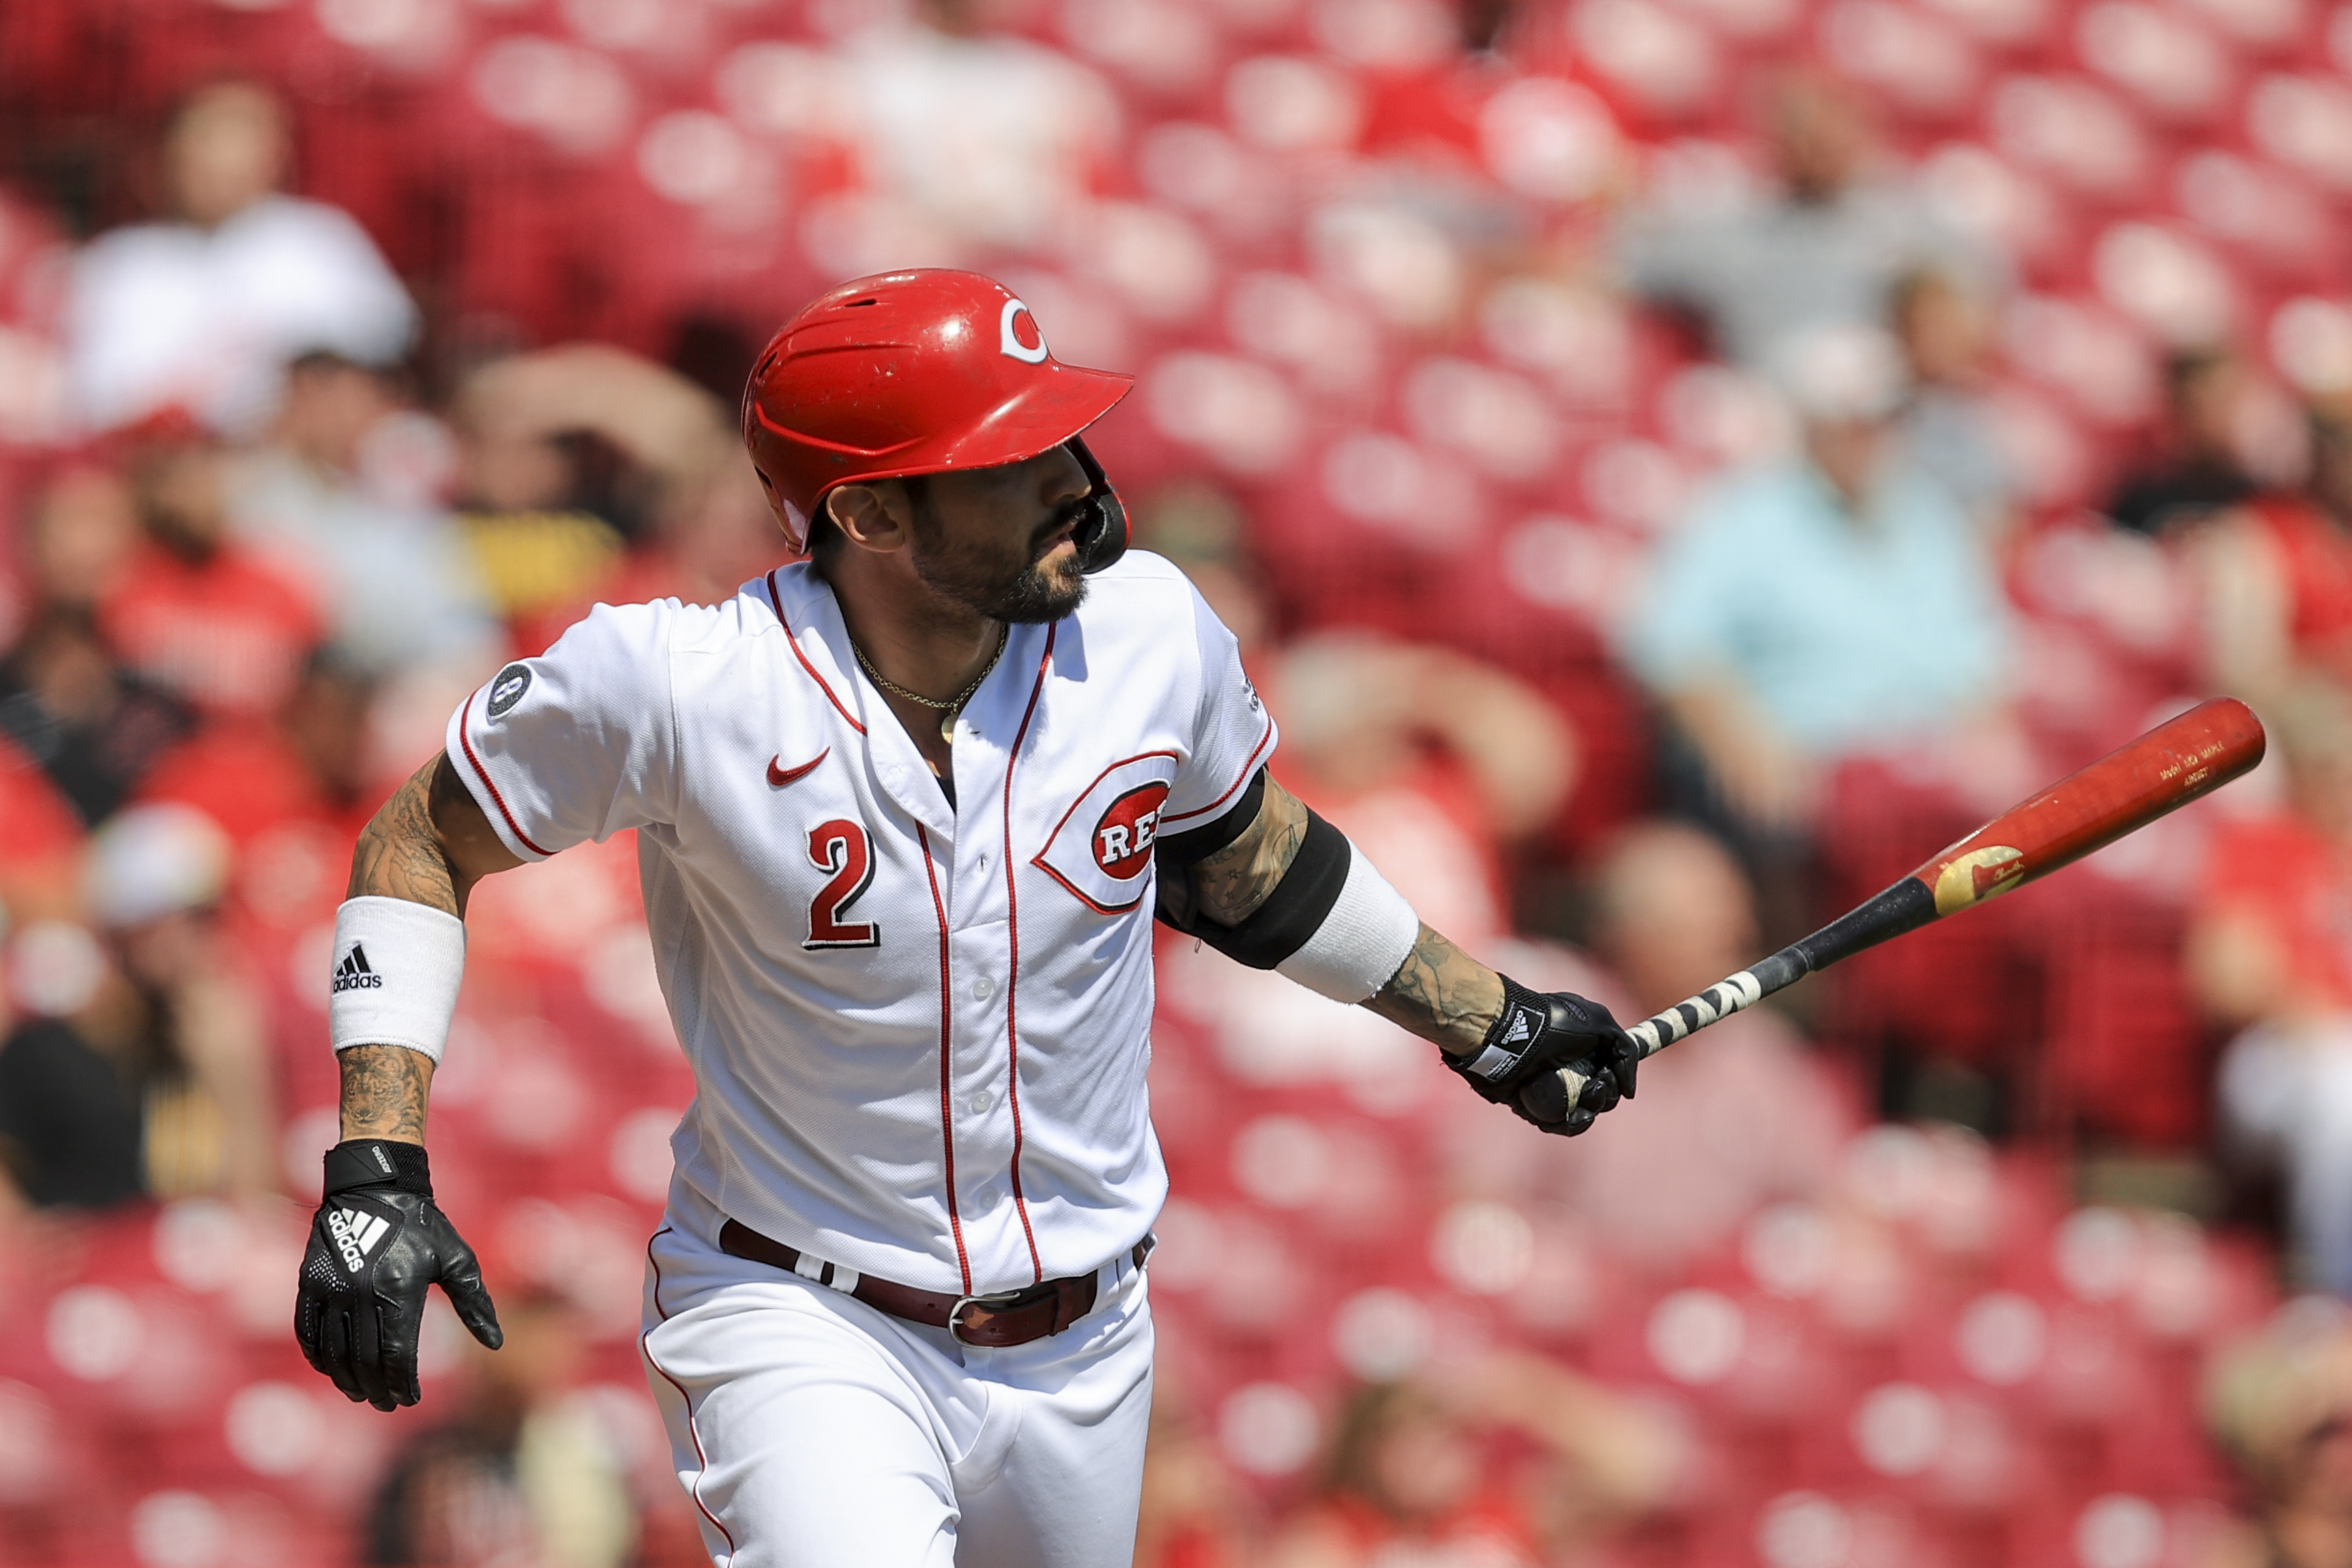 Nick Castellanos is back in the Reds' dugout. He was hit on the wrist by a  pitch in the 3rd inning and consequently left the game between…